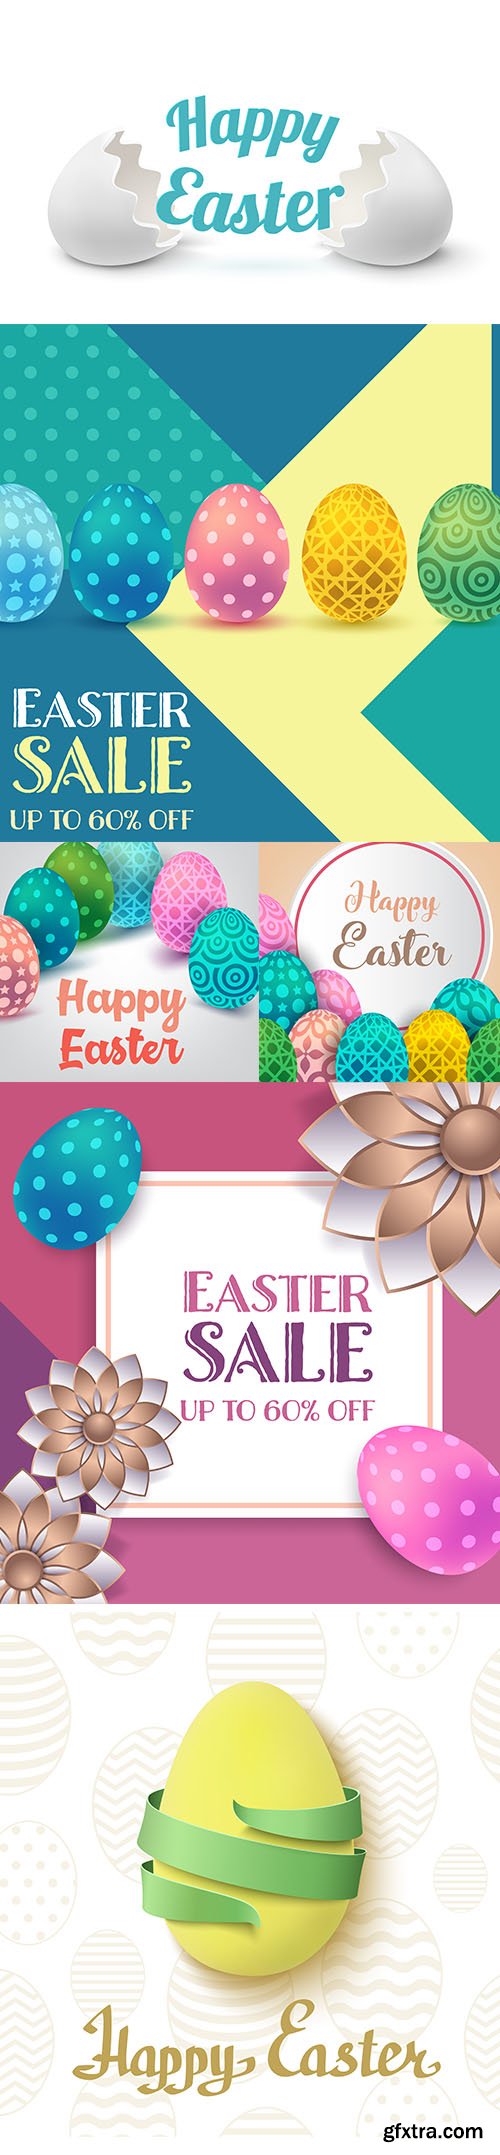 Happy Easter Background Template and Sale Offer Illustration